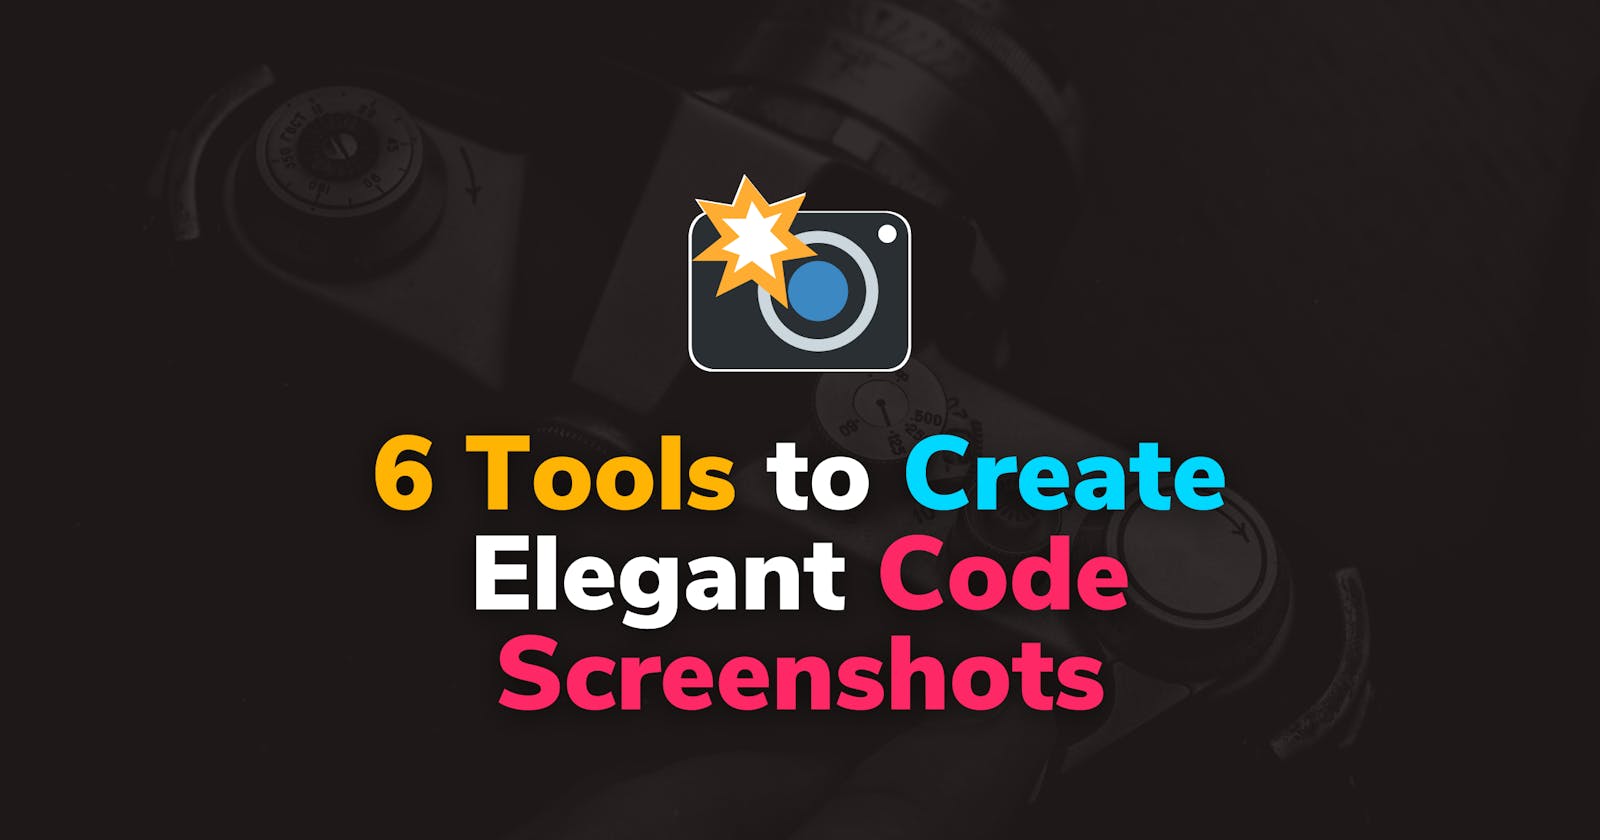 6 Tools to Create Elegant Code Screenshots for Your Social Networks